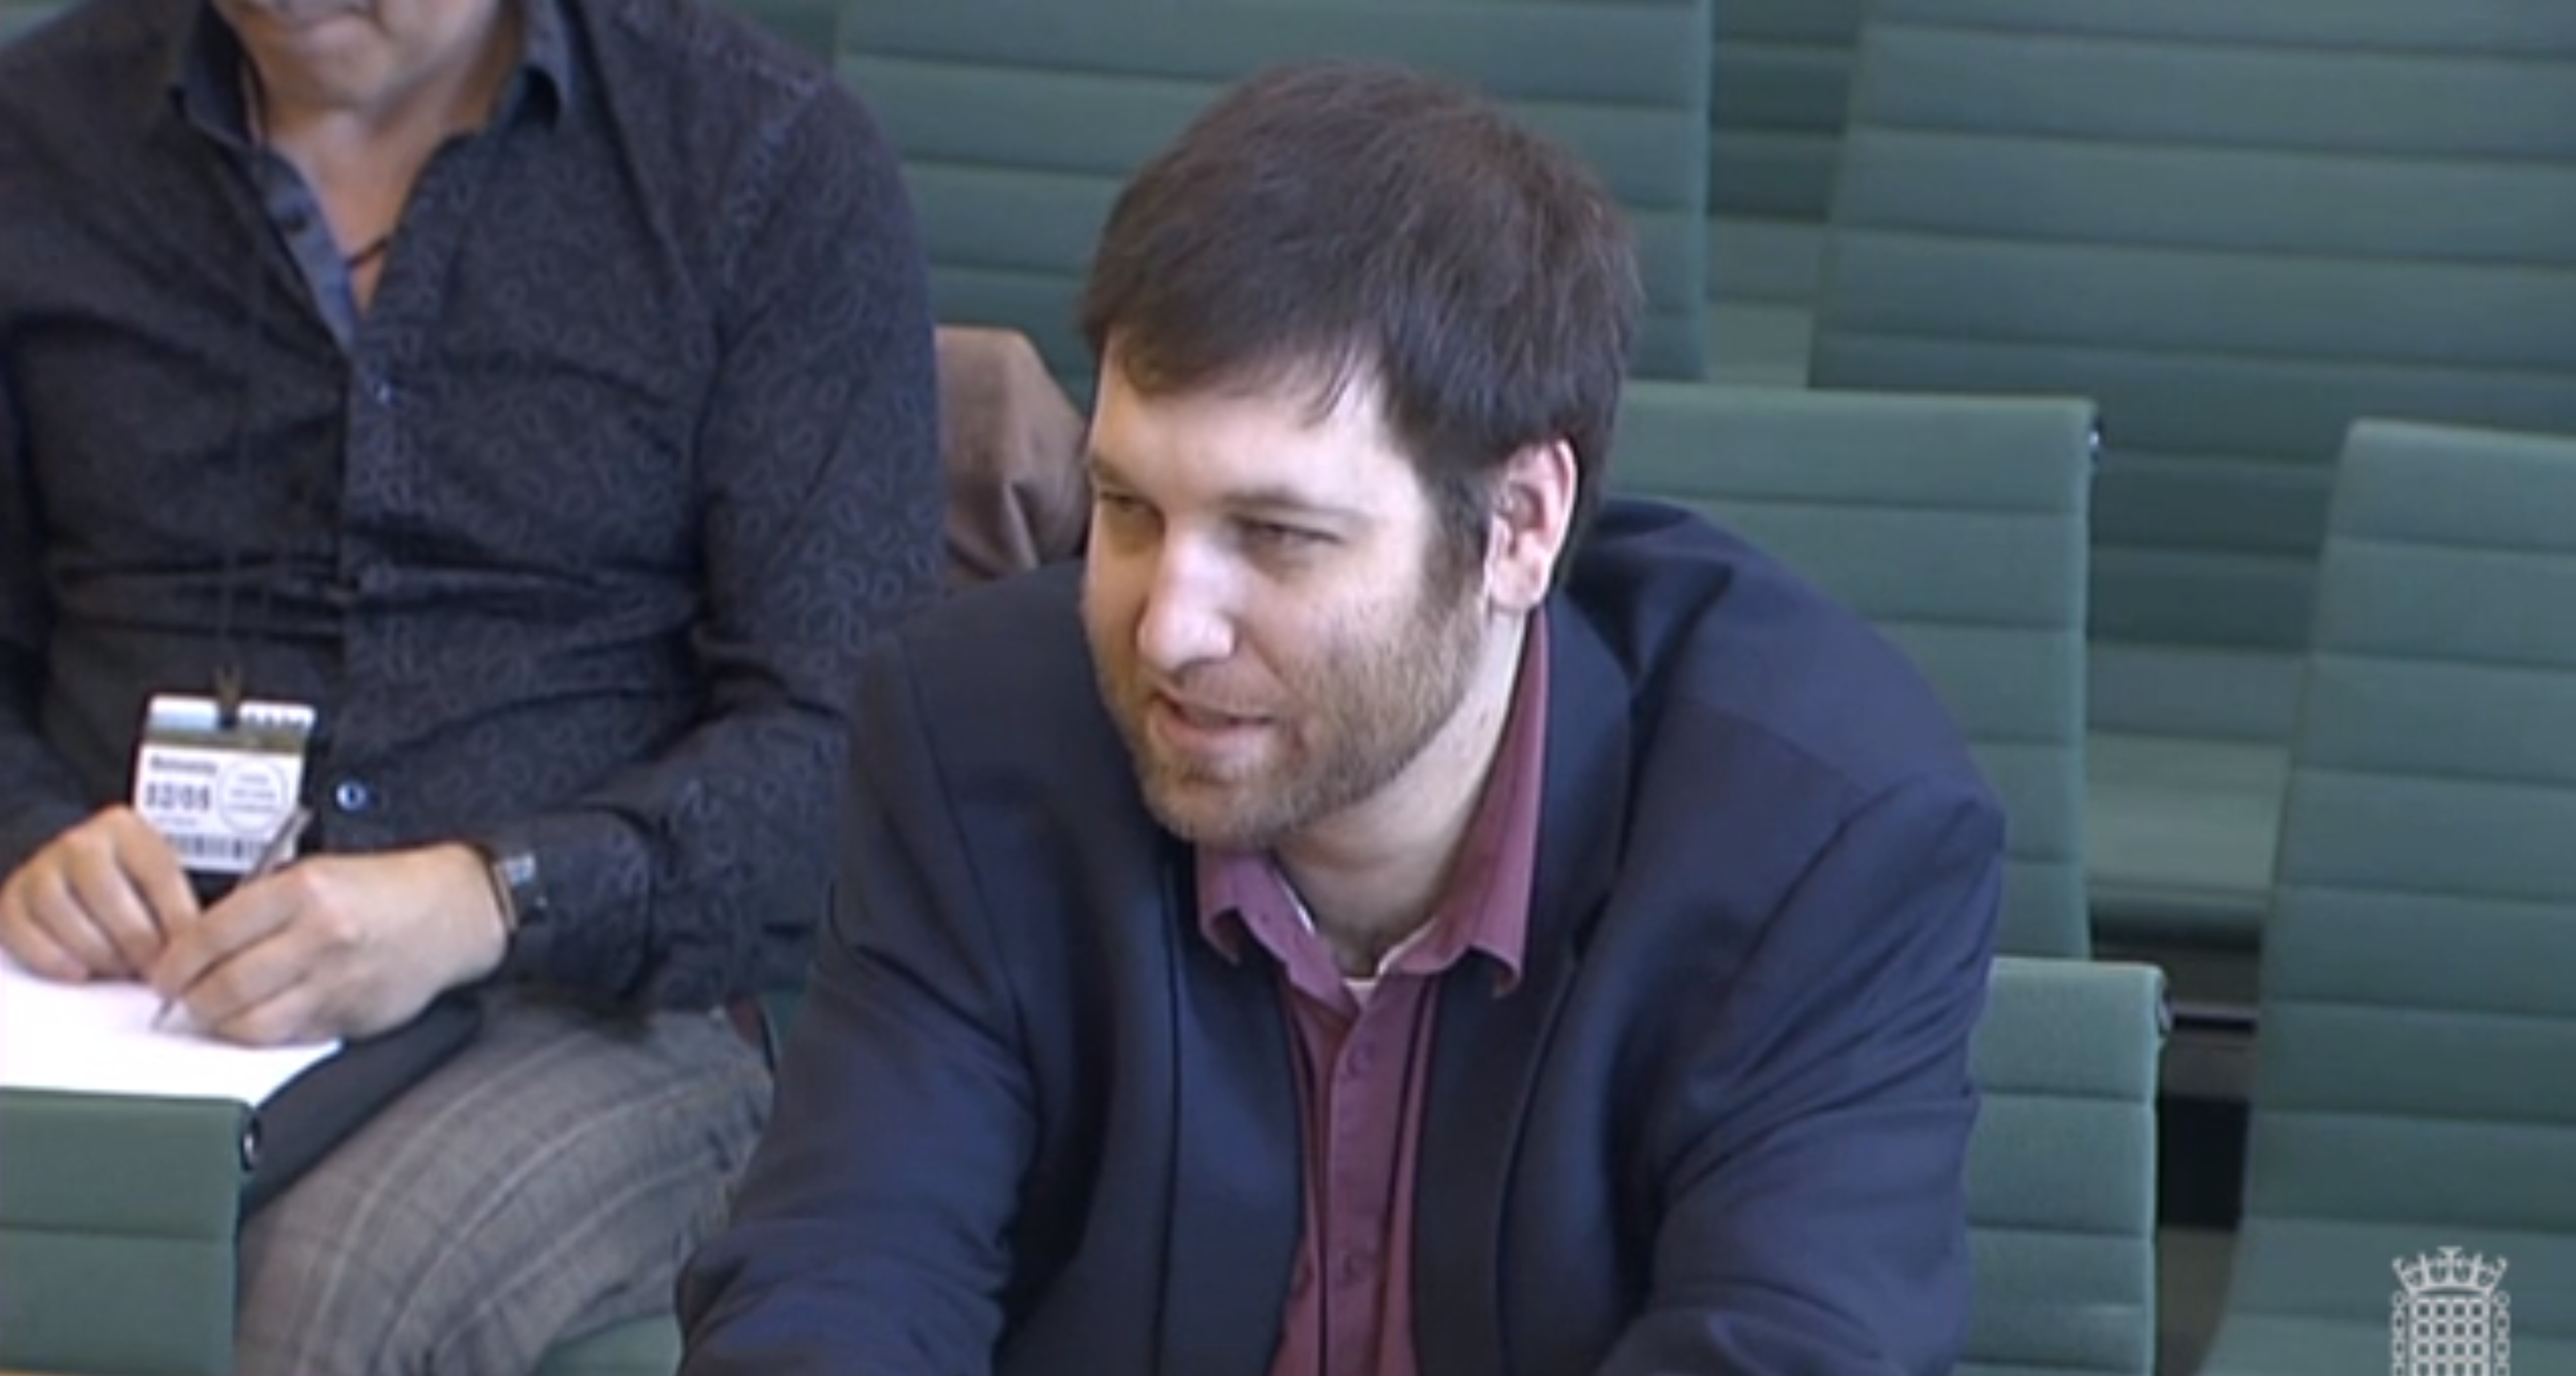 Chris Vickery gives evidence to the DCMs committee about Facebook,m Brexit, Aggregate IQ and Cambridge Analytica